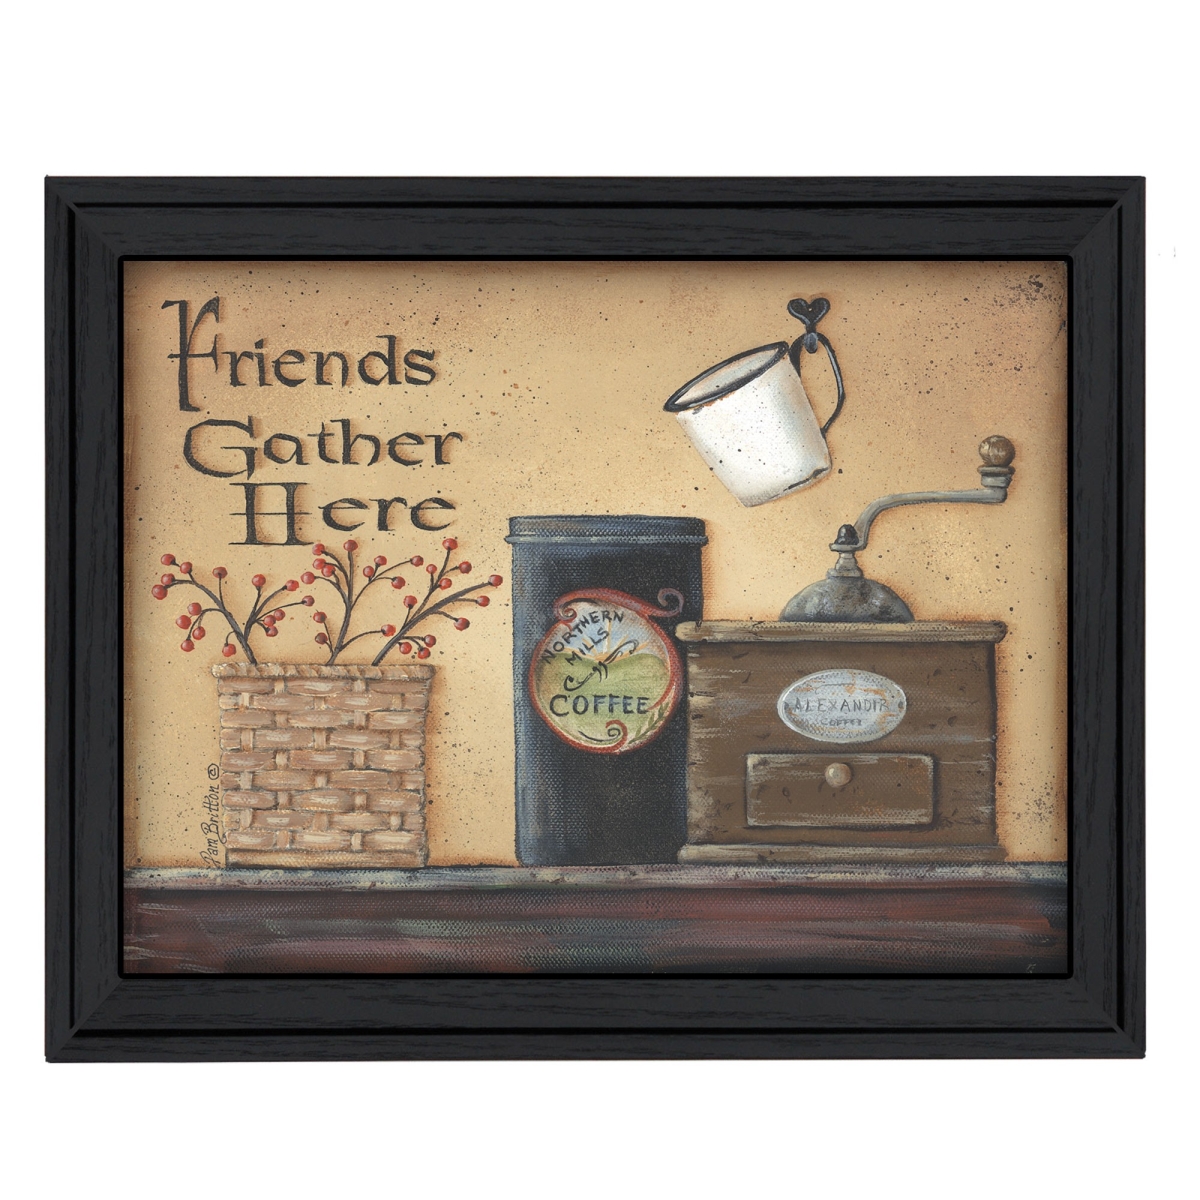 HomeRoots 404692 15 x 19 x 1 in. Friends Gather Here Black Framed Print Wall Art